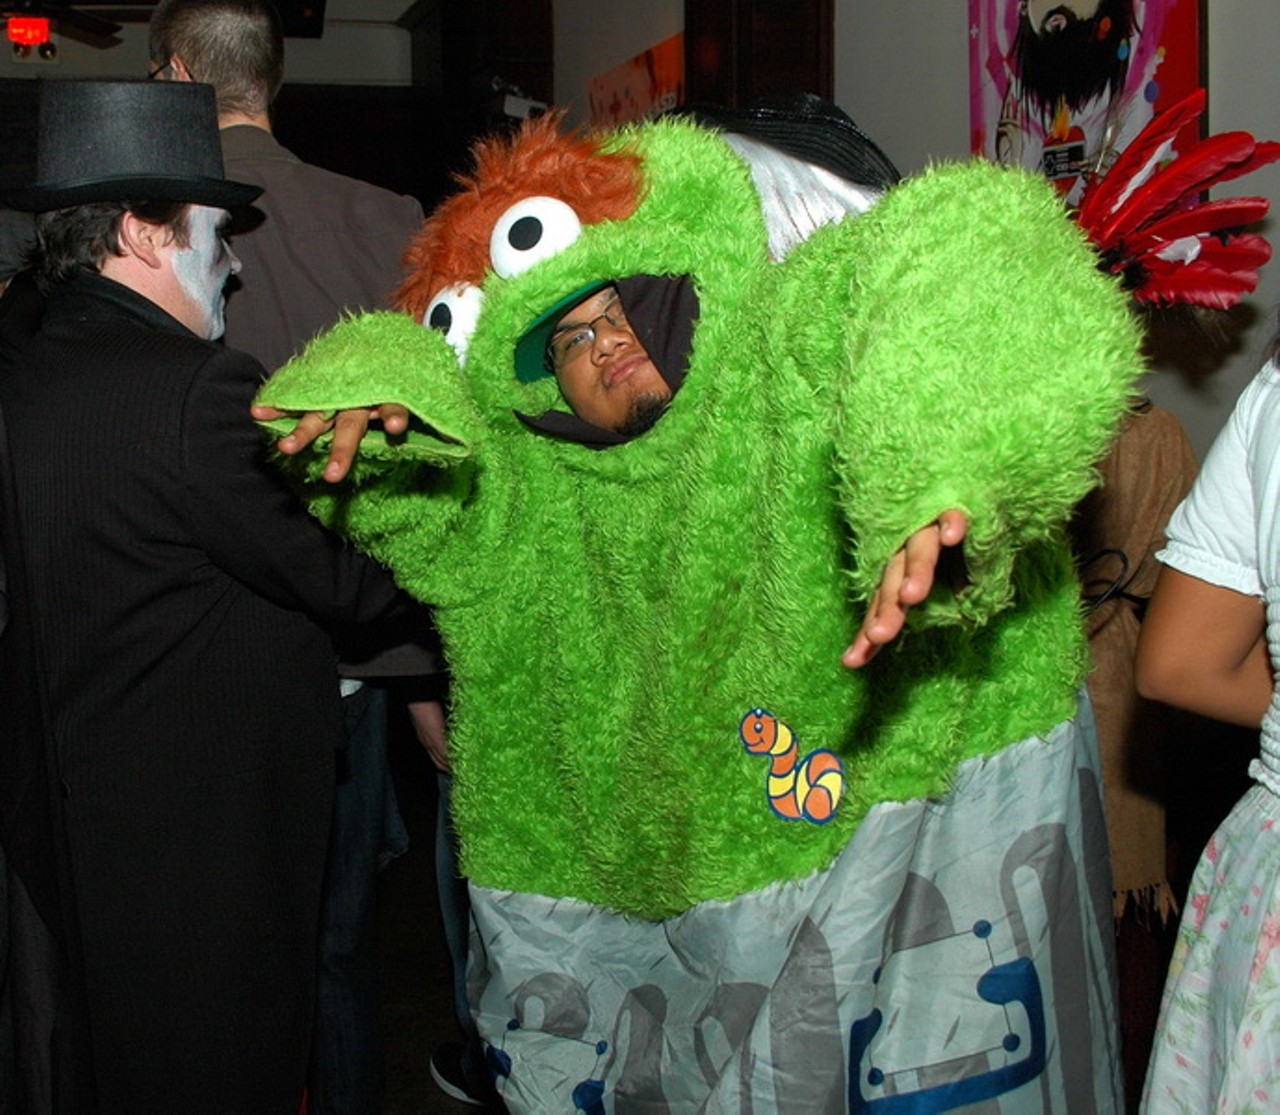 There is a man inside Oscar the Grouch, in Dallas.